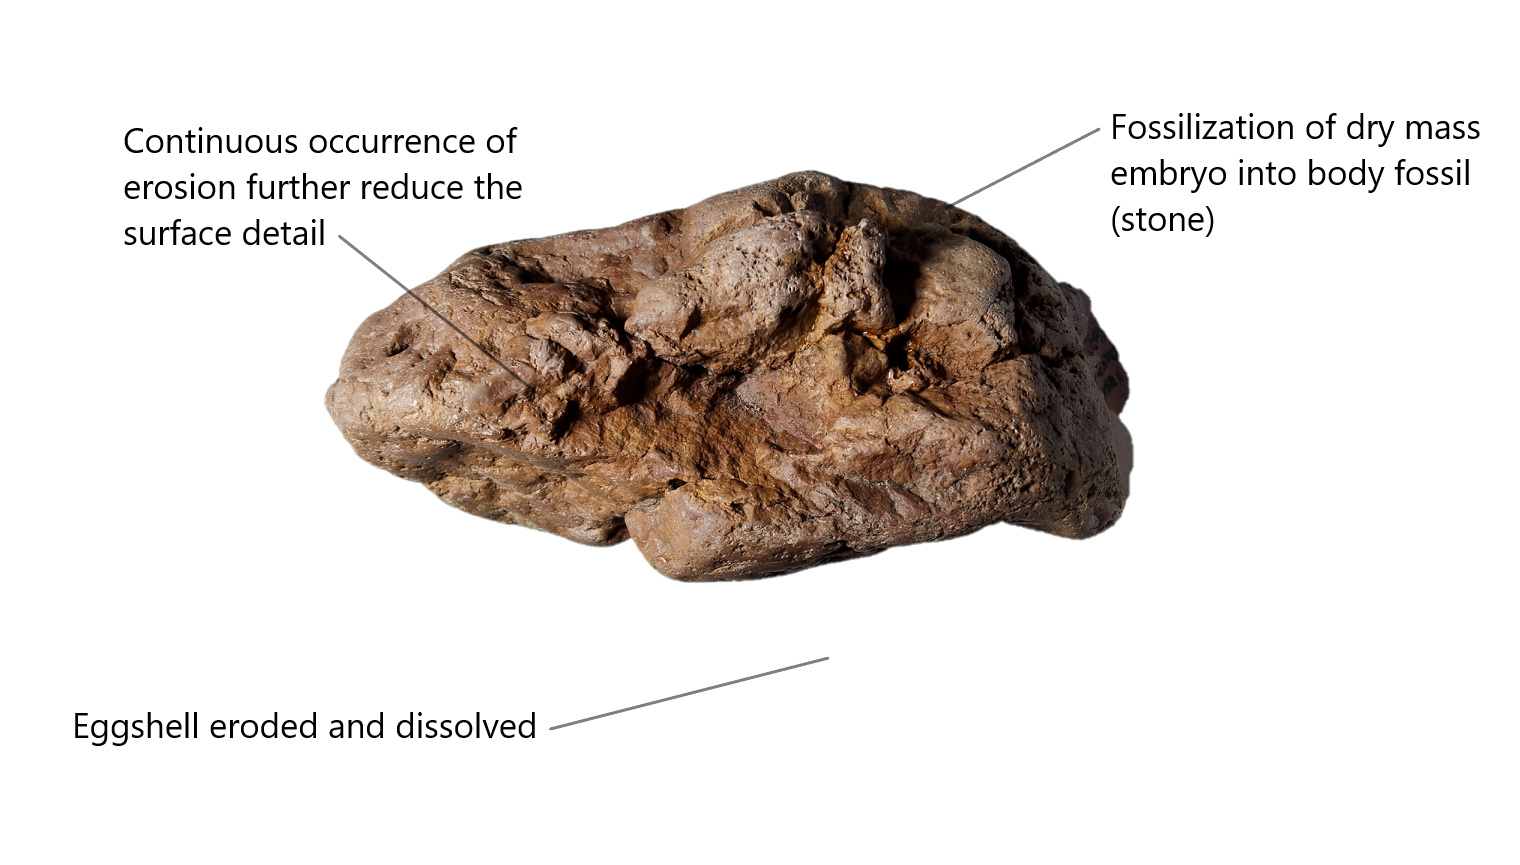 Figure 21. Fossilization of dry mass embryo and turn into ordinary rock. The continuous natural erosion causes a further reduction in surface clarity. Most eggshell will erode but if eggshell is preserved, they will usually form a thin film-like layer on top of the embryo with distinct color.